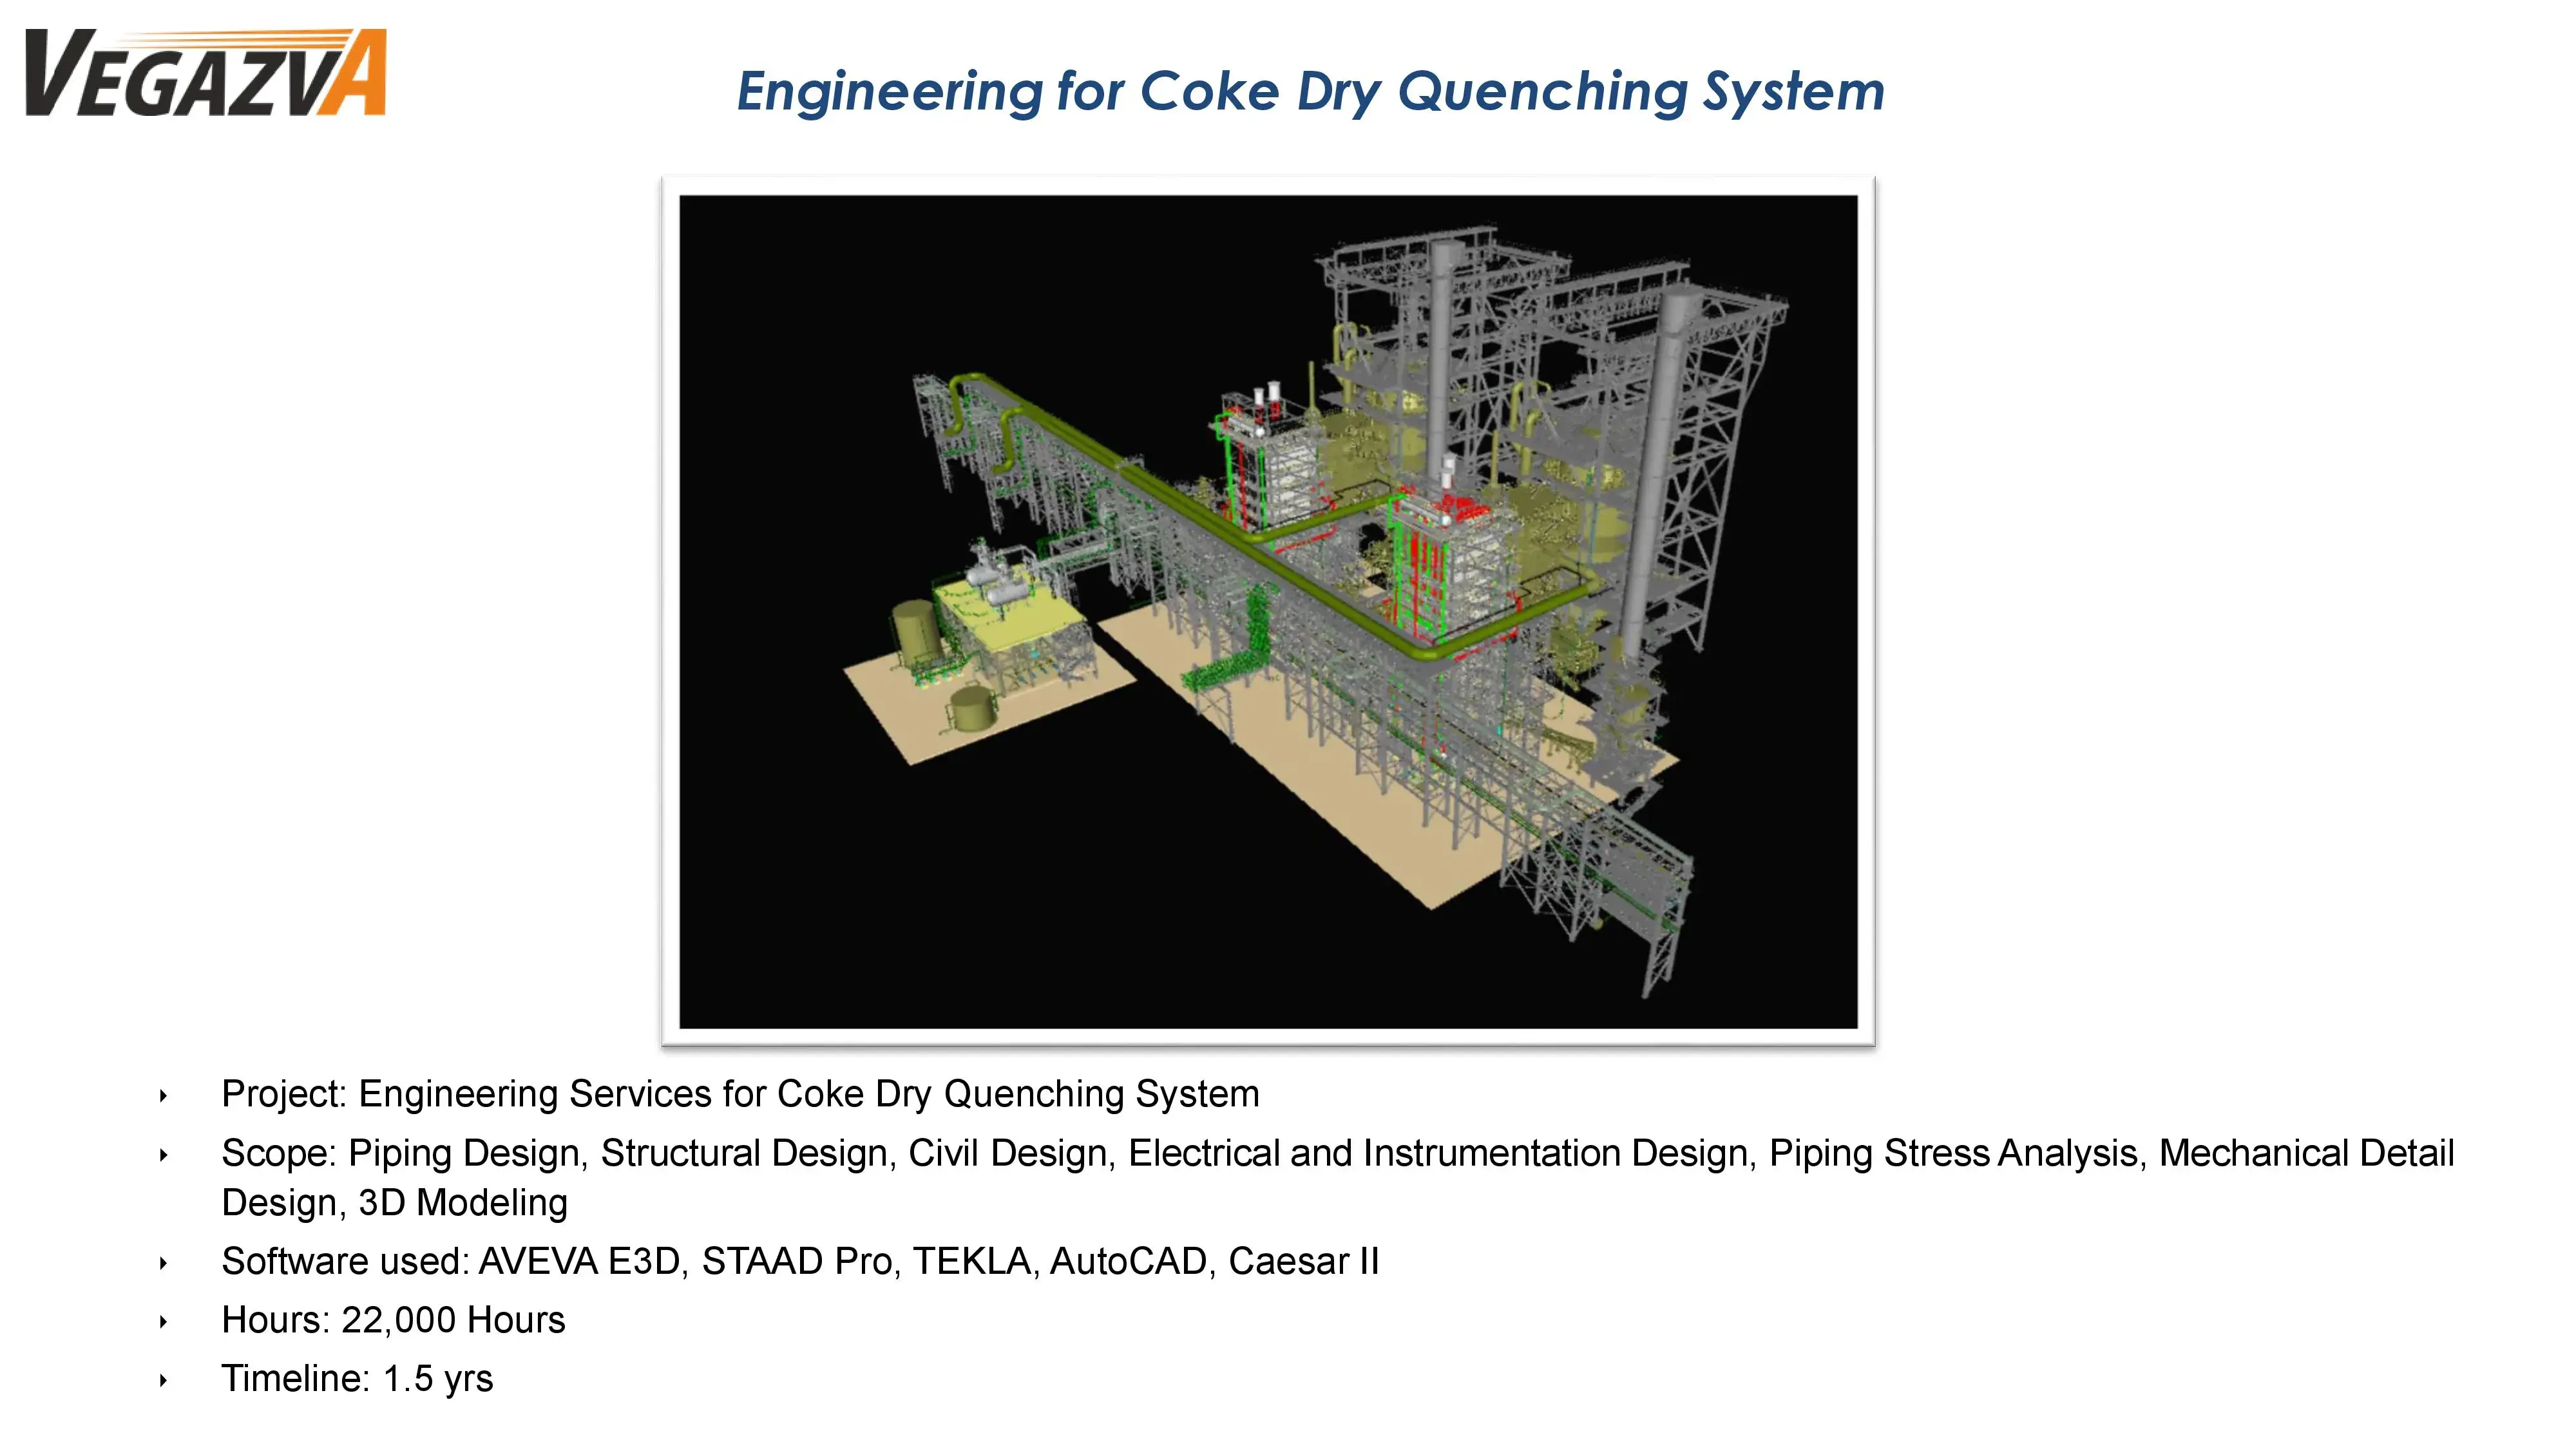 Engineering for Coke Dry Quenching System